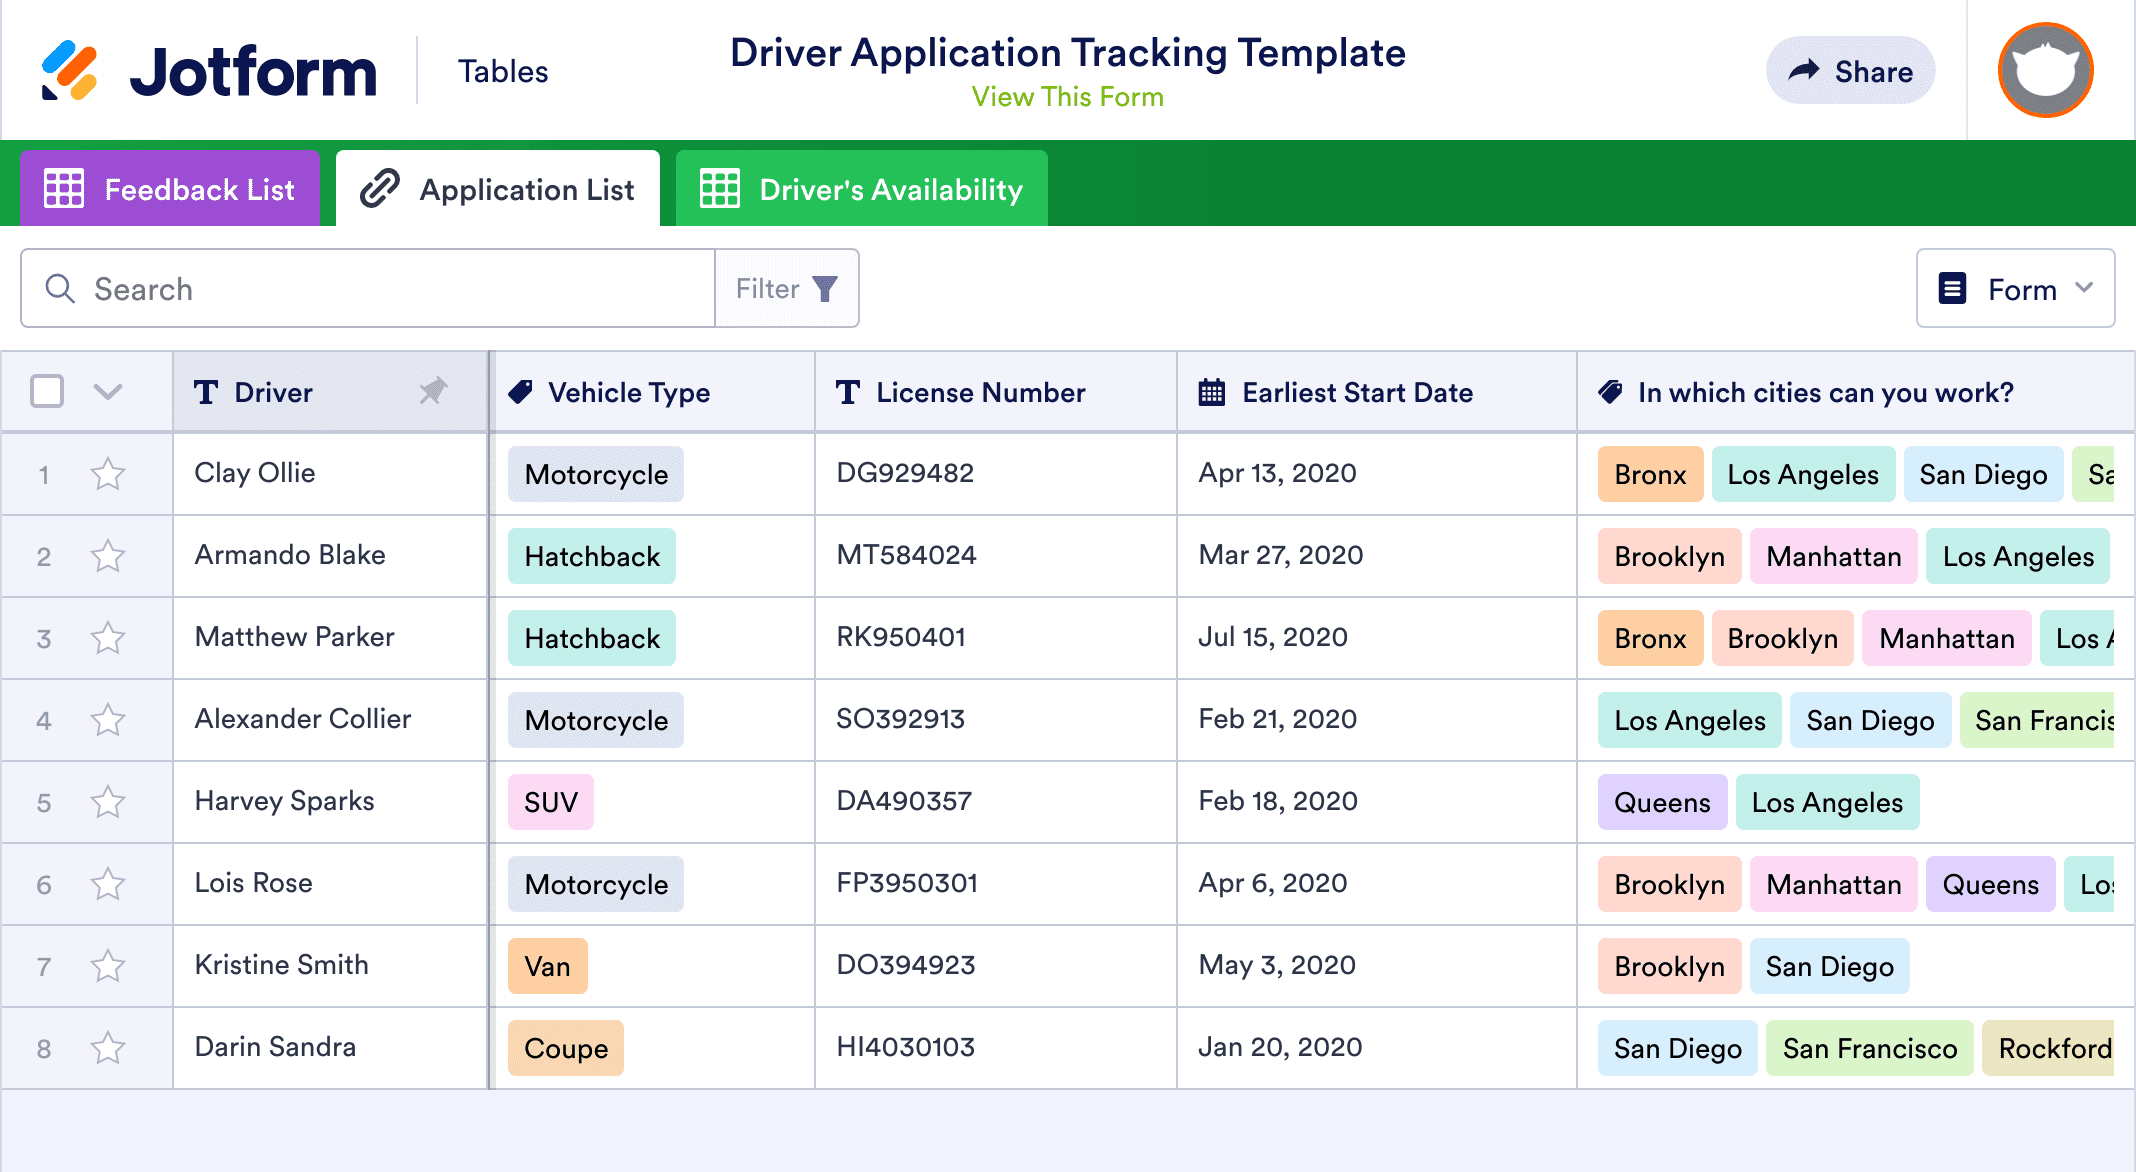 Driver Application Tracking Template